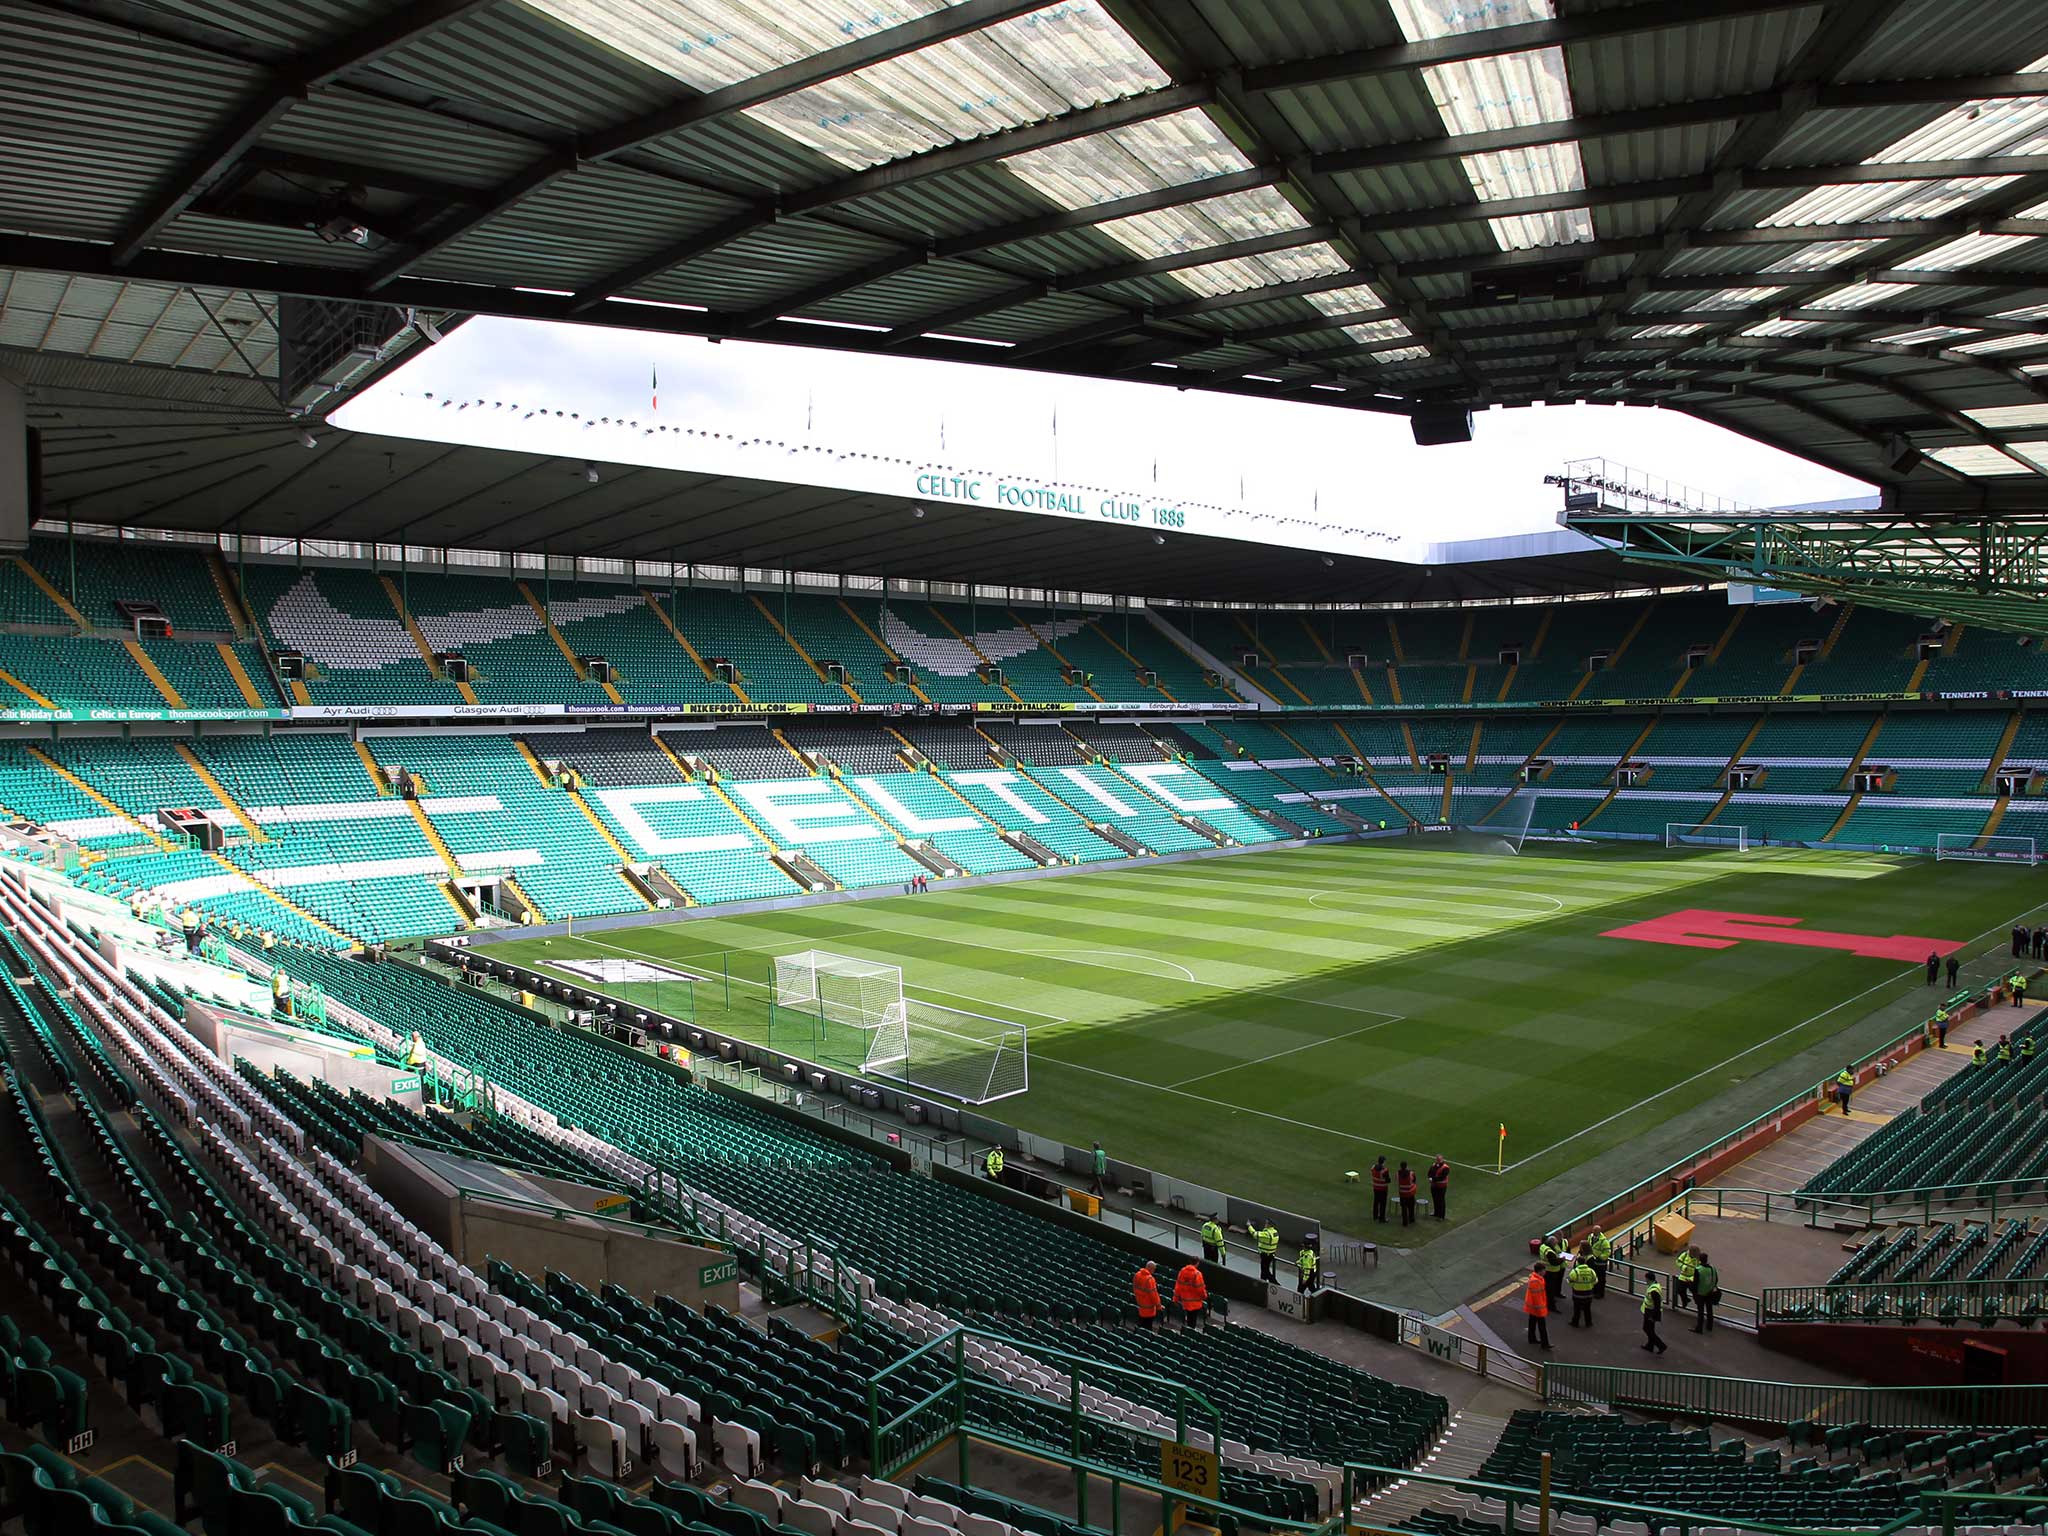 A view of the Celtic Park Stadium